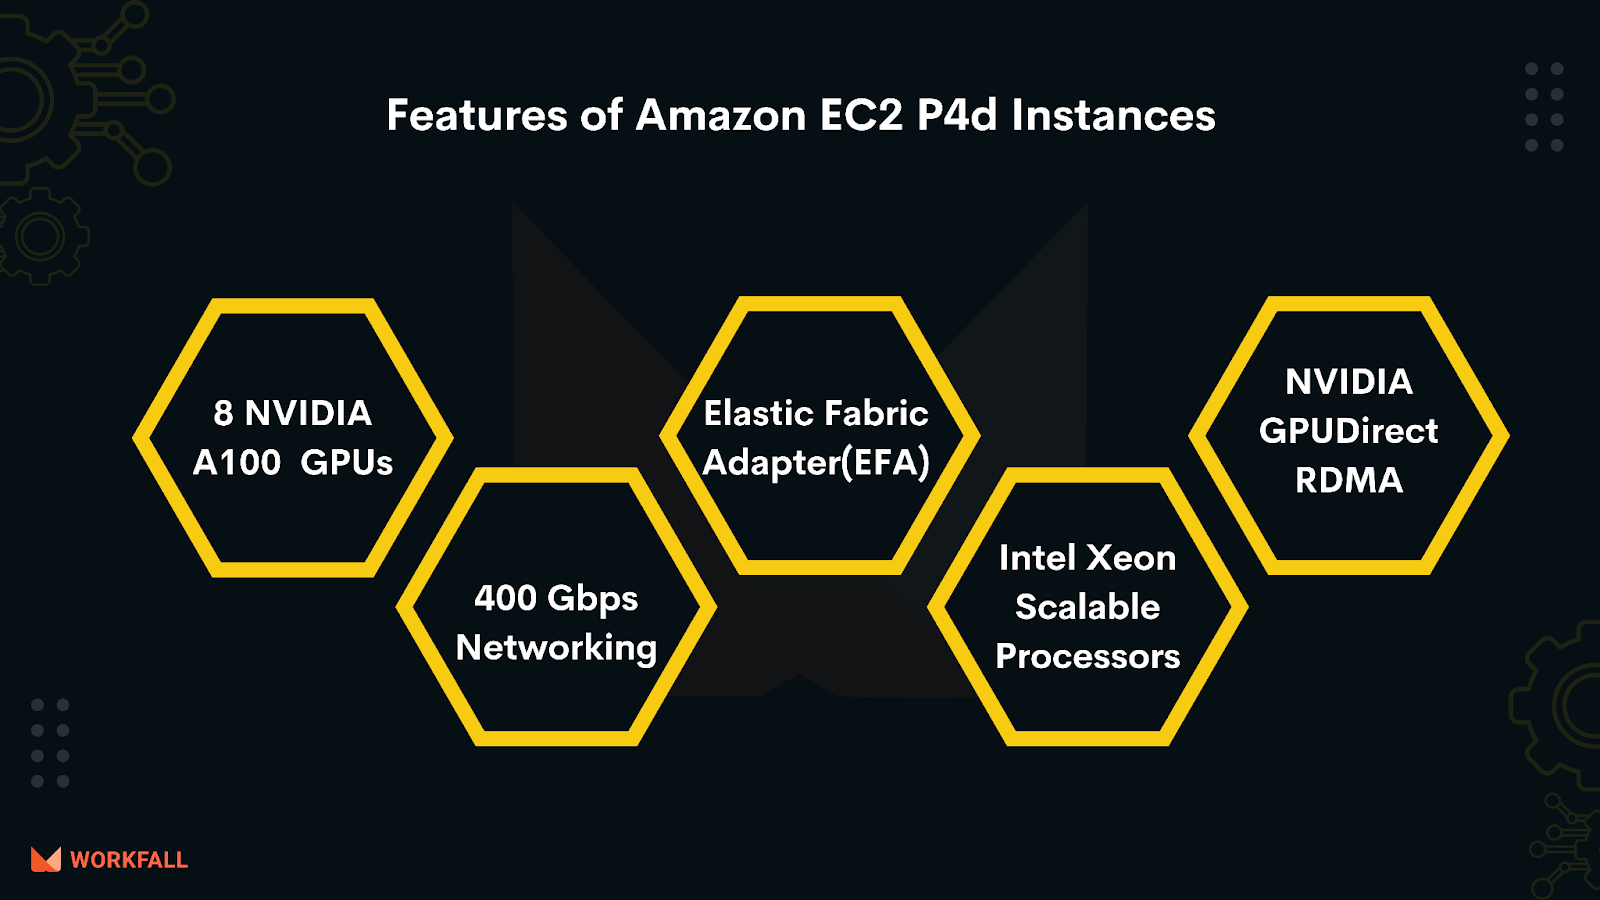 How to deploy Amazon EC2 P4d instances in EC2 UltraClusters to get highest performance for ML training and HPC in the Cloud?